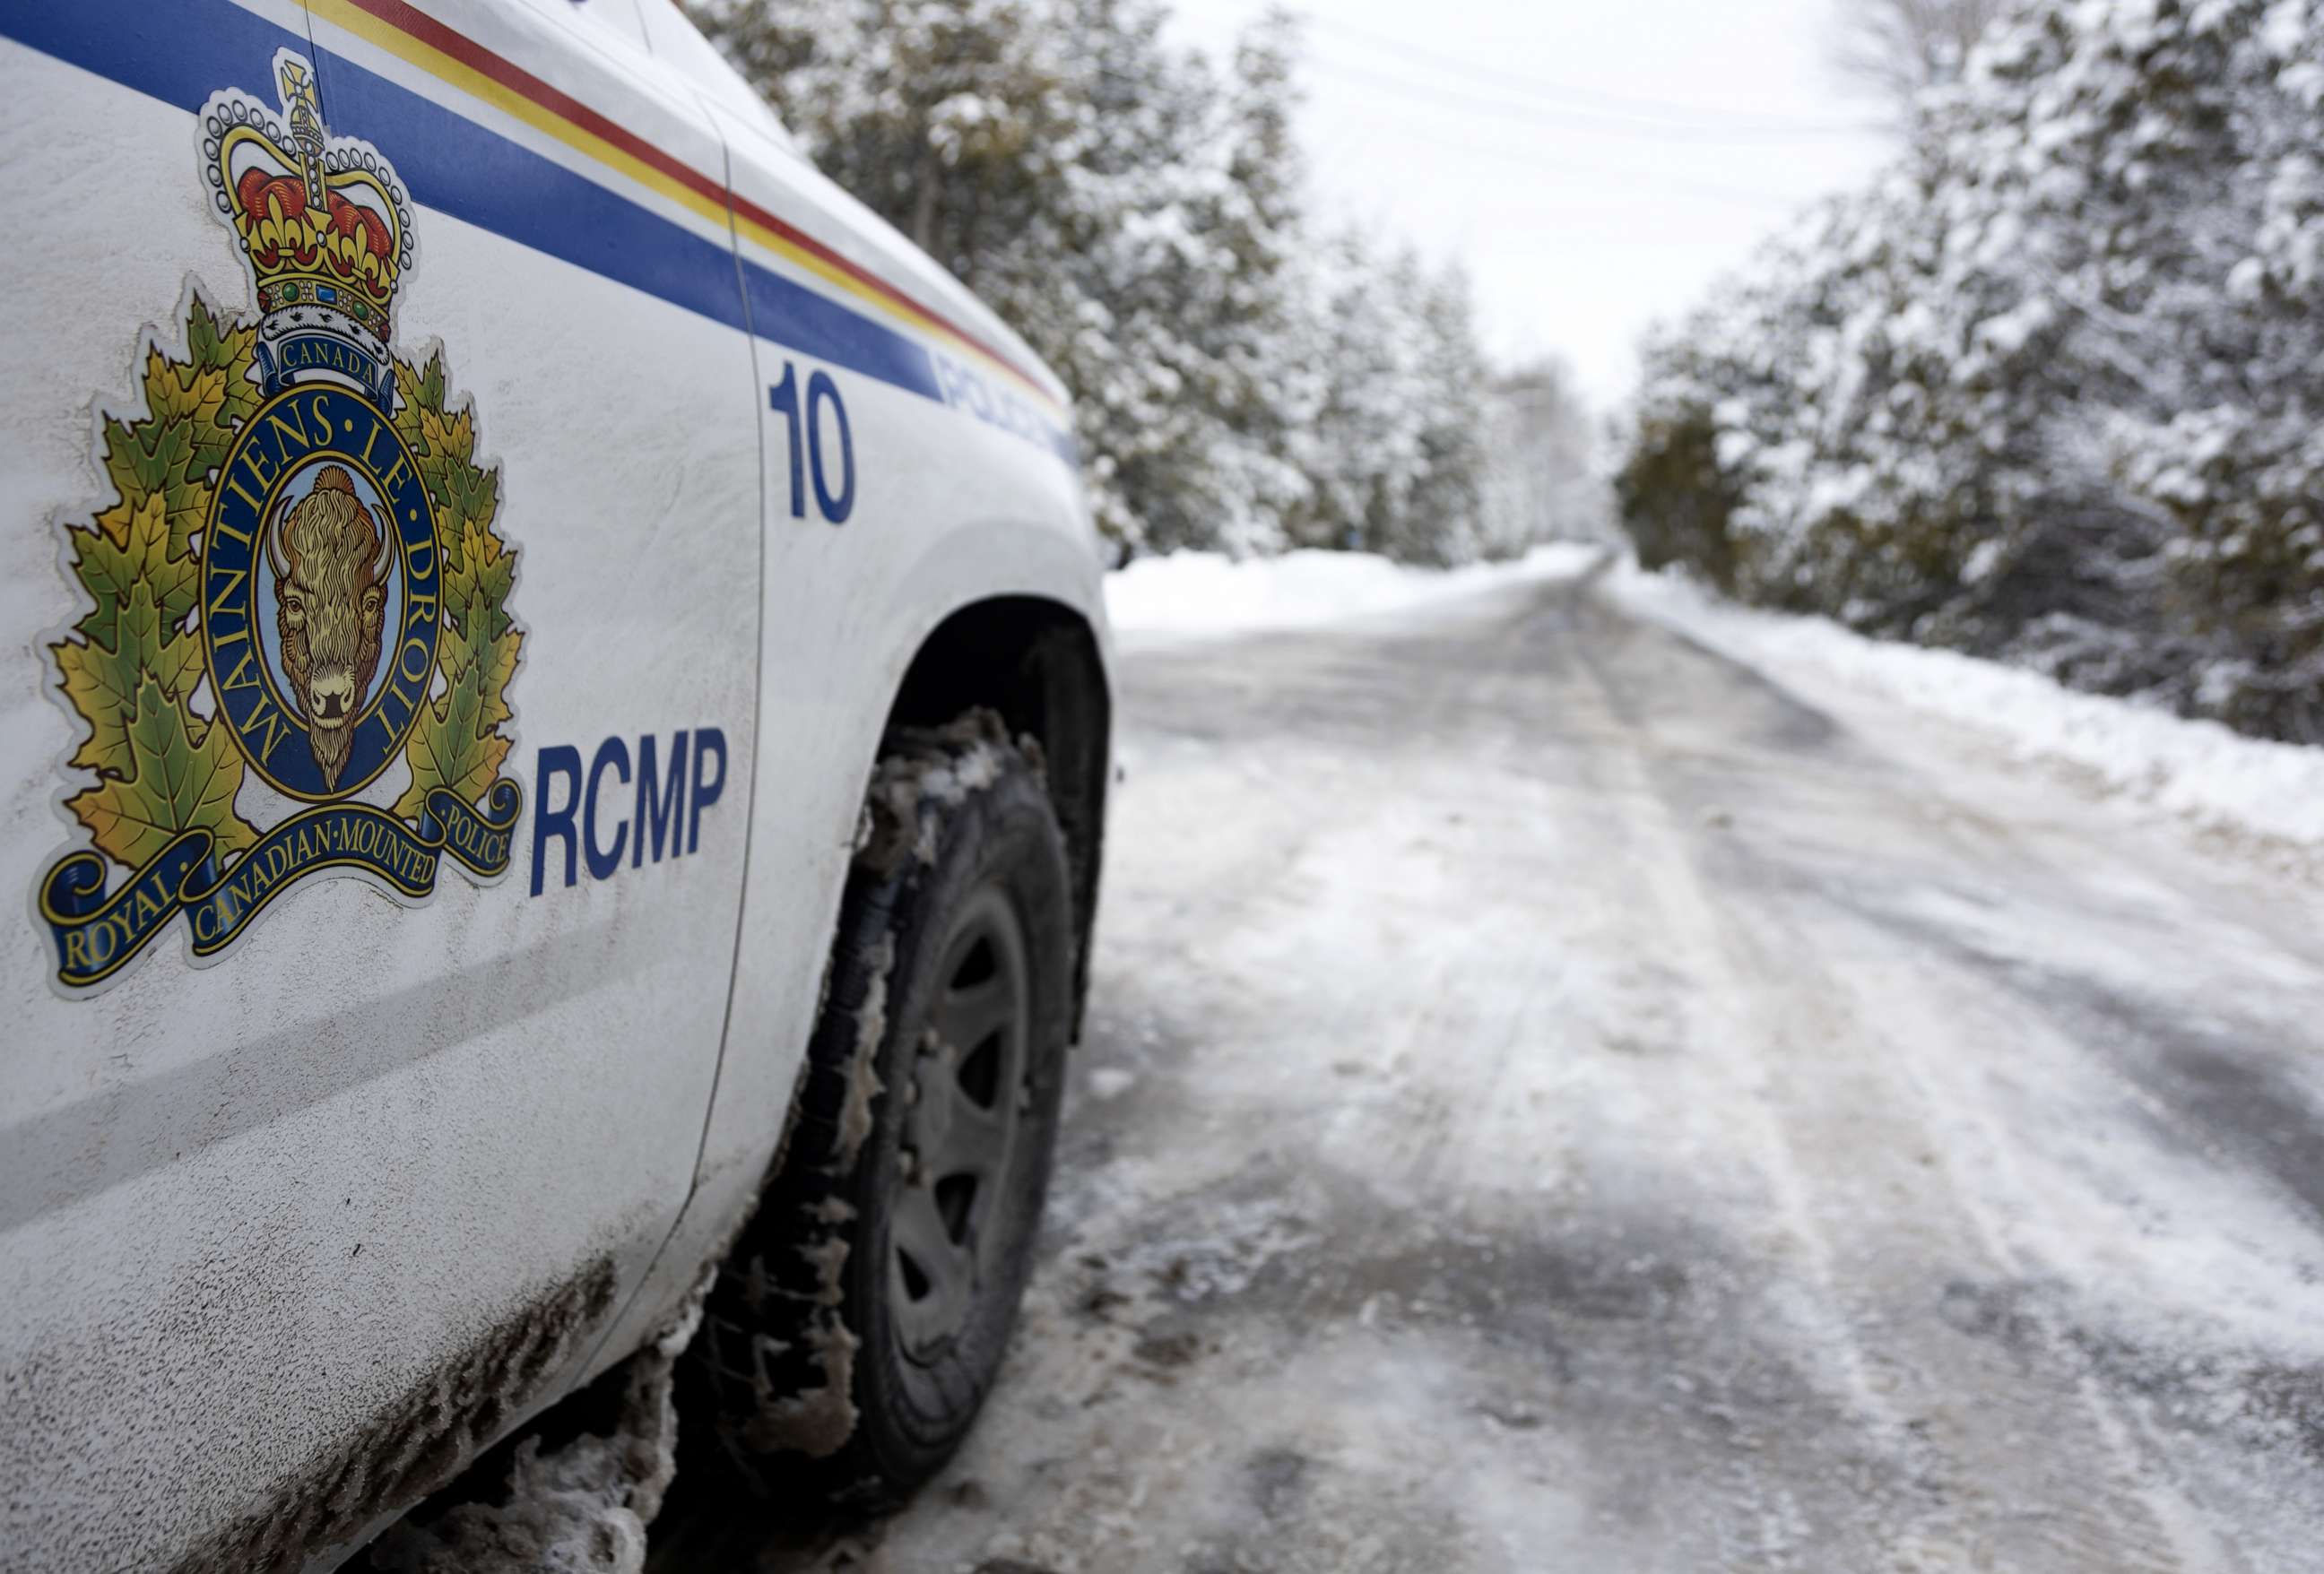 PHOTO: A Royal Canadian Mounted Police (RCMP) car along Roxham Road in Saint-Bernard-de-Lacolle, Quebec, Canada, March 5, 2023.